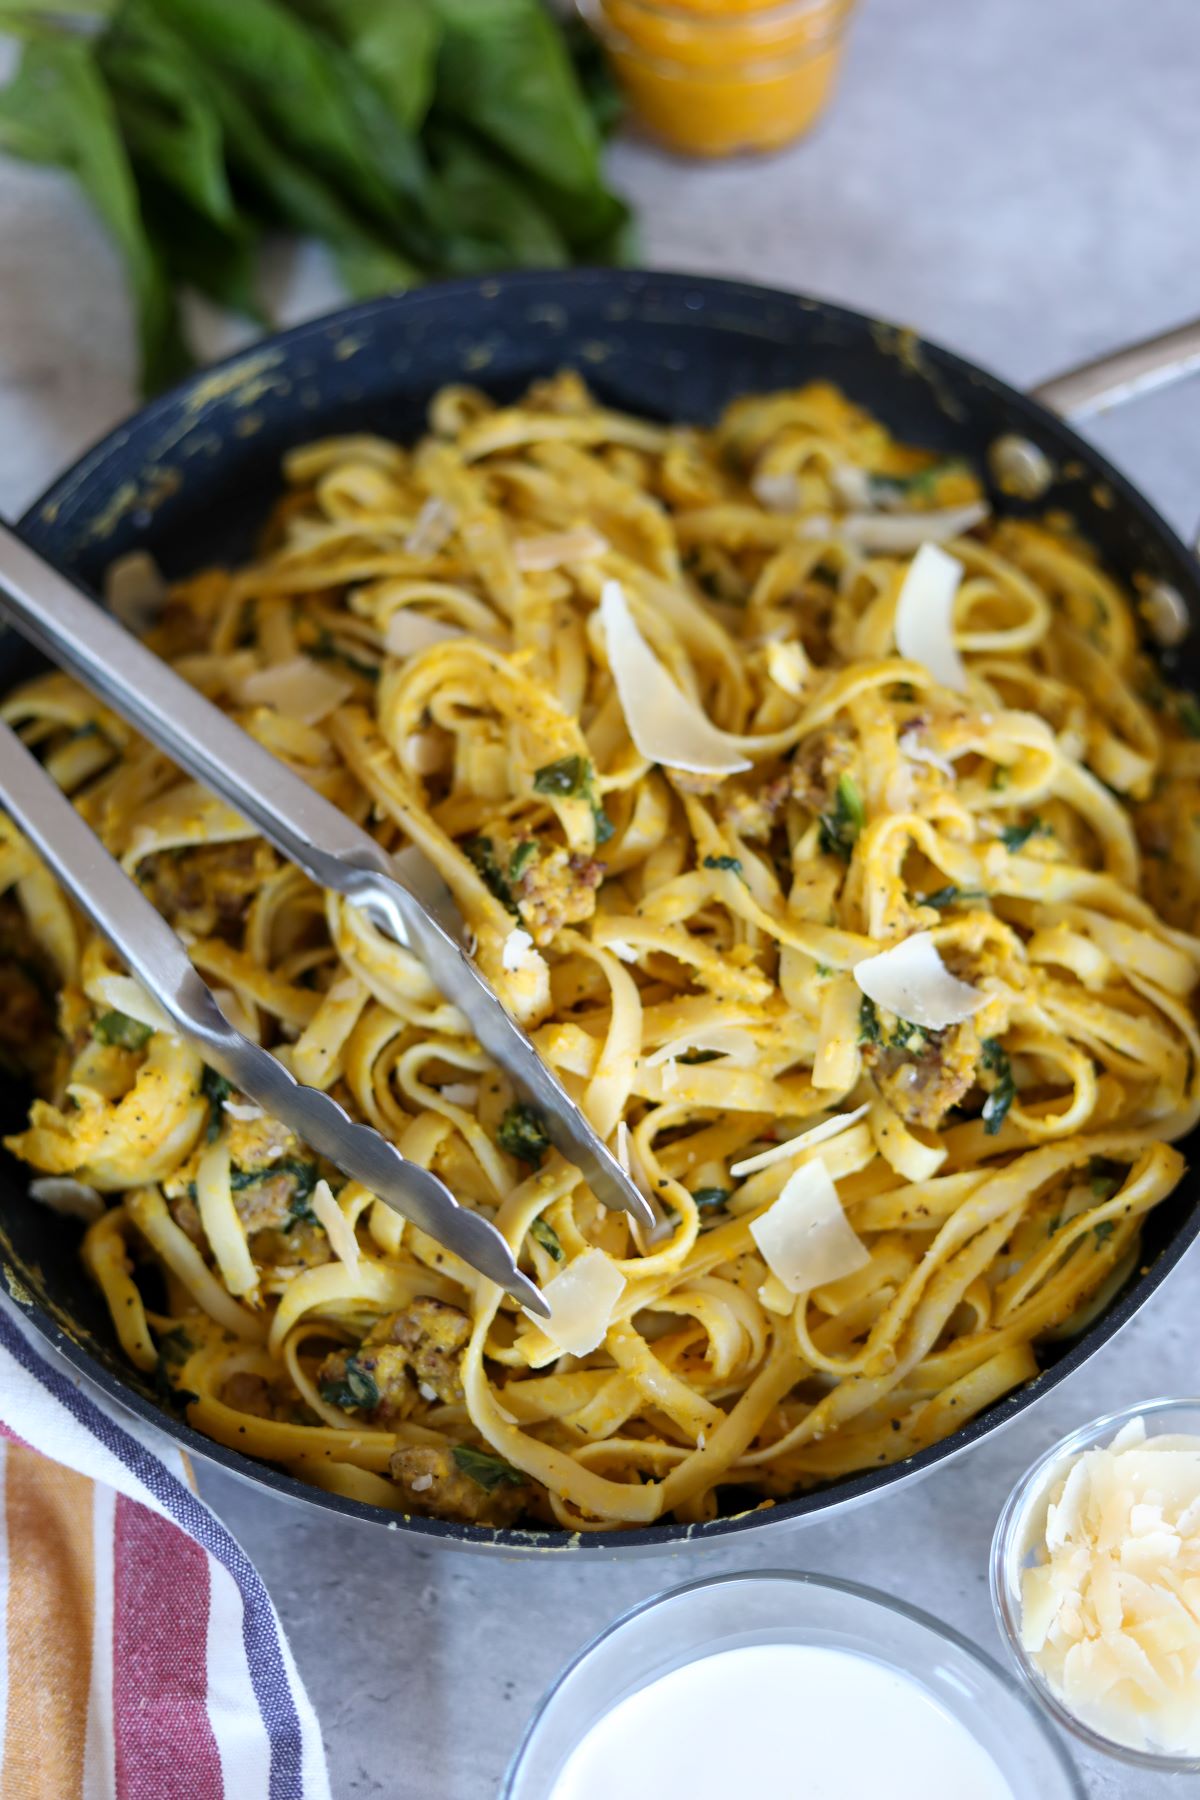 pumpkin pasta in a pan with tongs